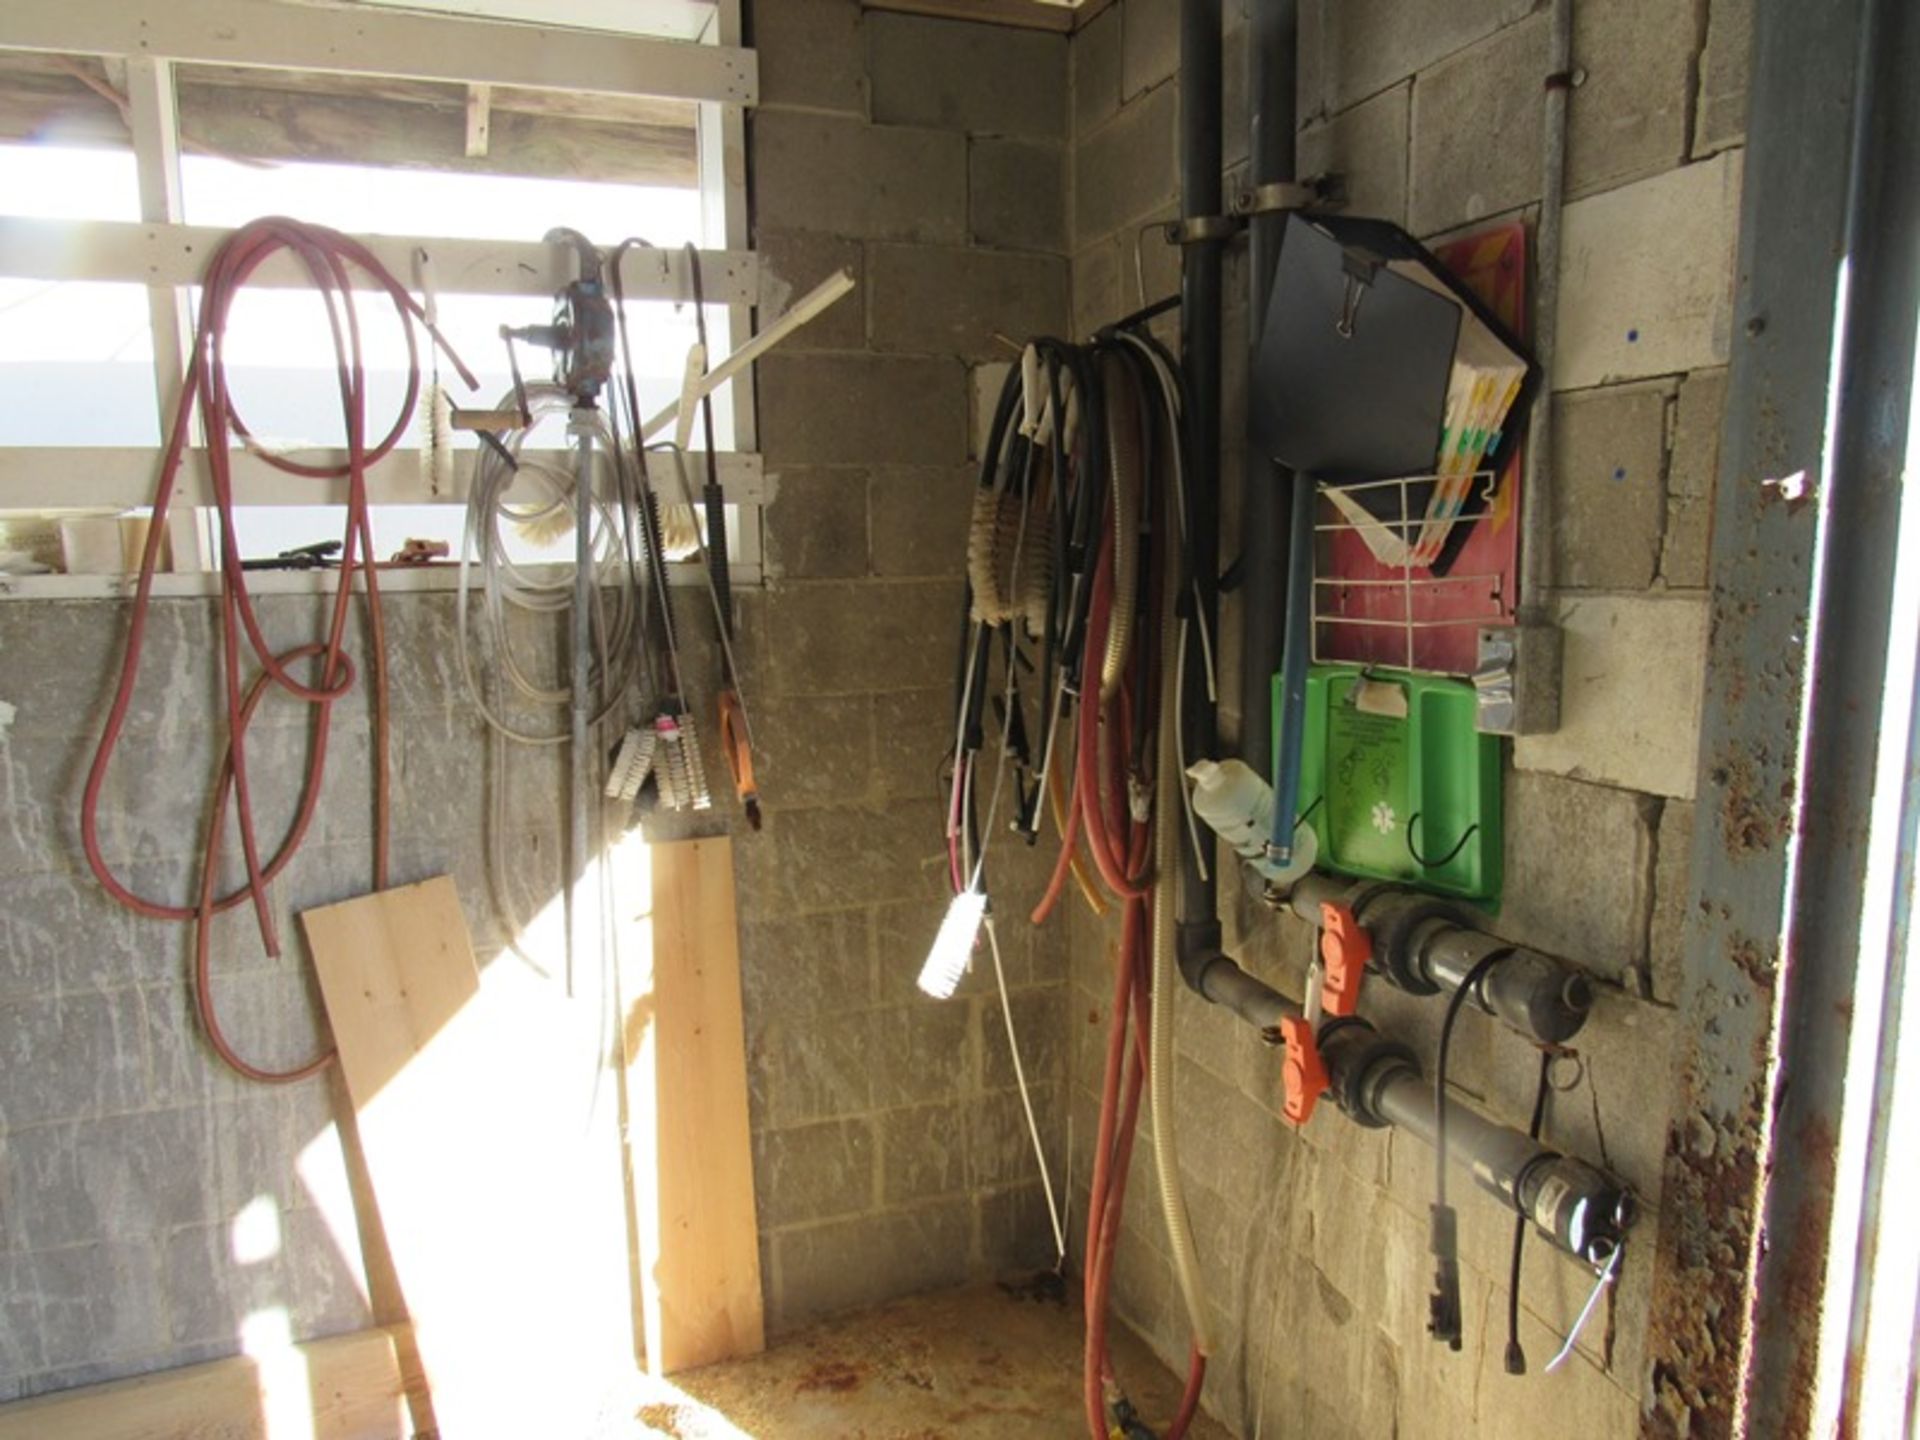 Lot Compressor Room Contents: Desk, Chairs, Hose, Sprayers, Bump Caps, Boots, Stainless Steel - Image 7 of 10